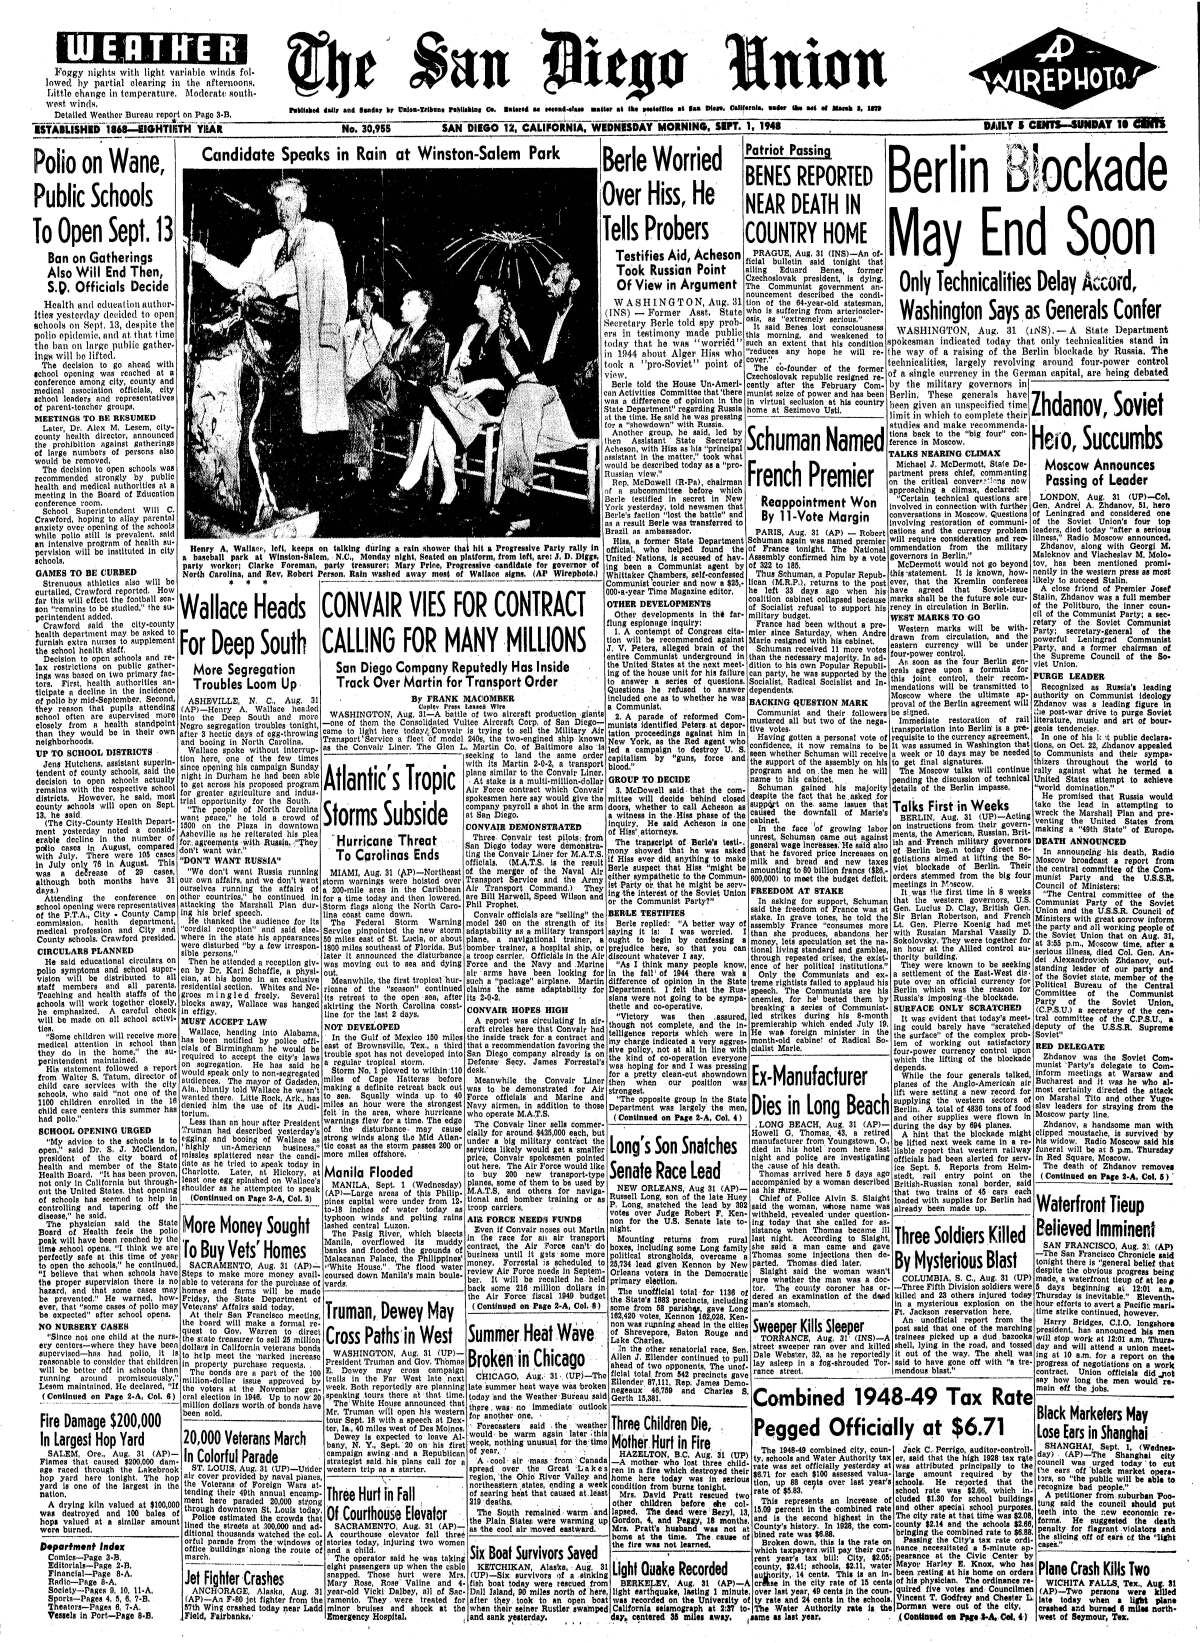 September 1, 1948 Union front page with headline,"Polio on Wane, Public Schools to Open..."